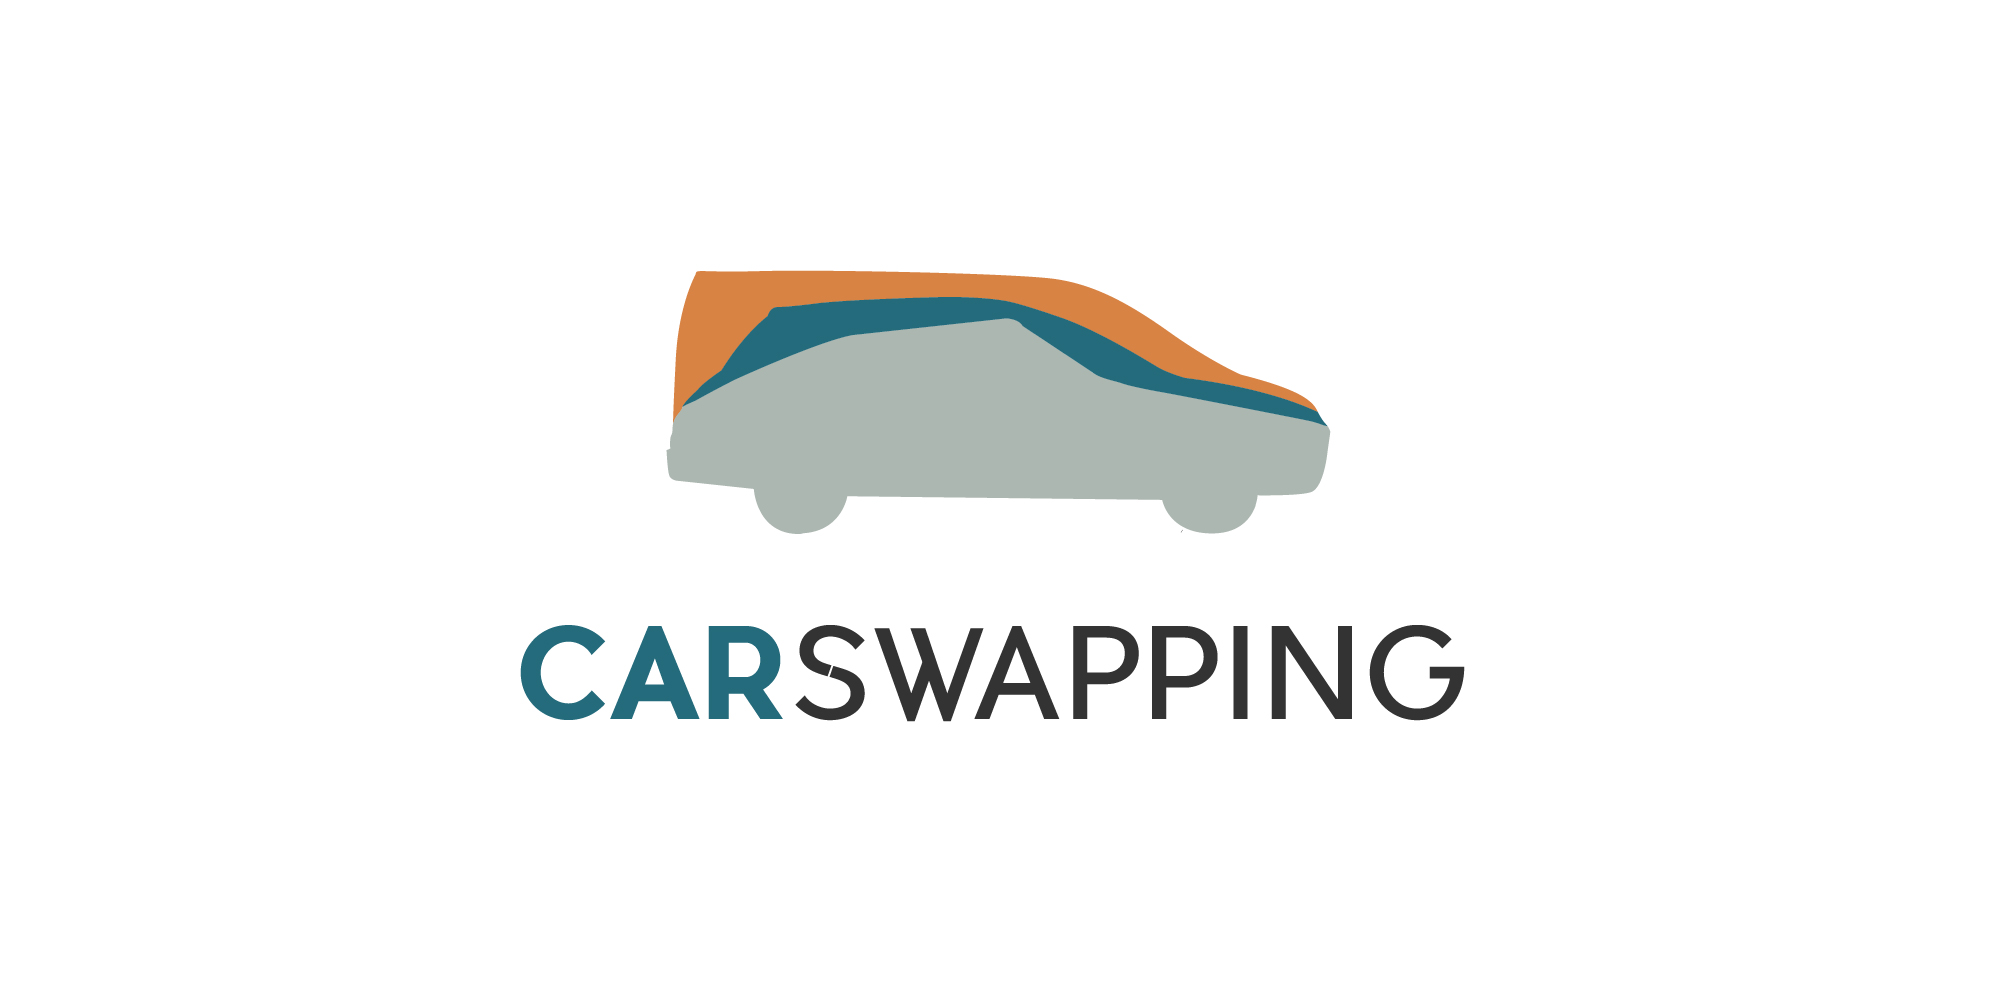 CARSWAPPING